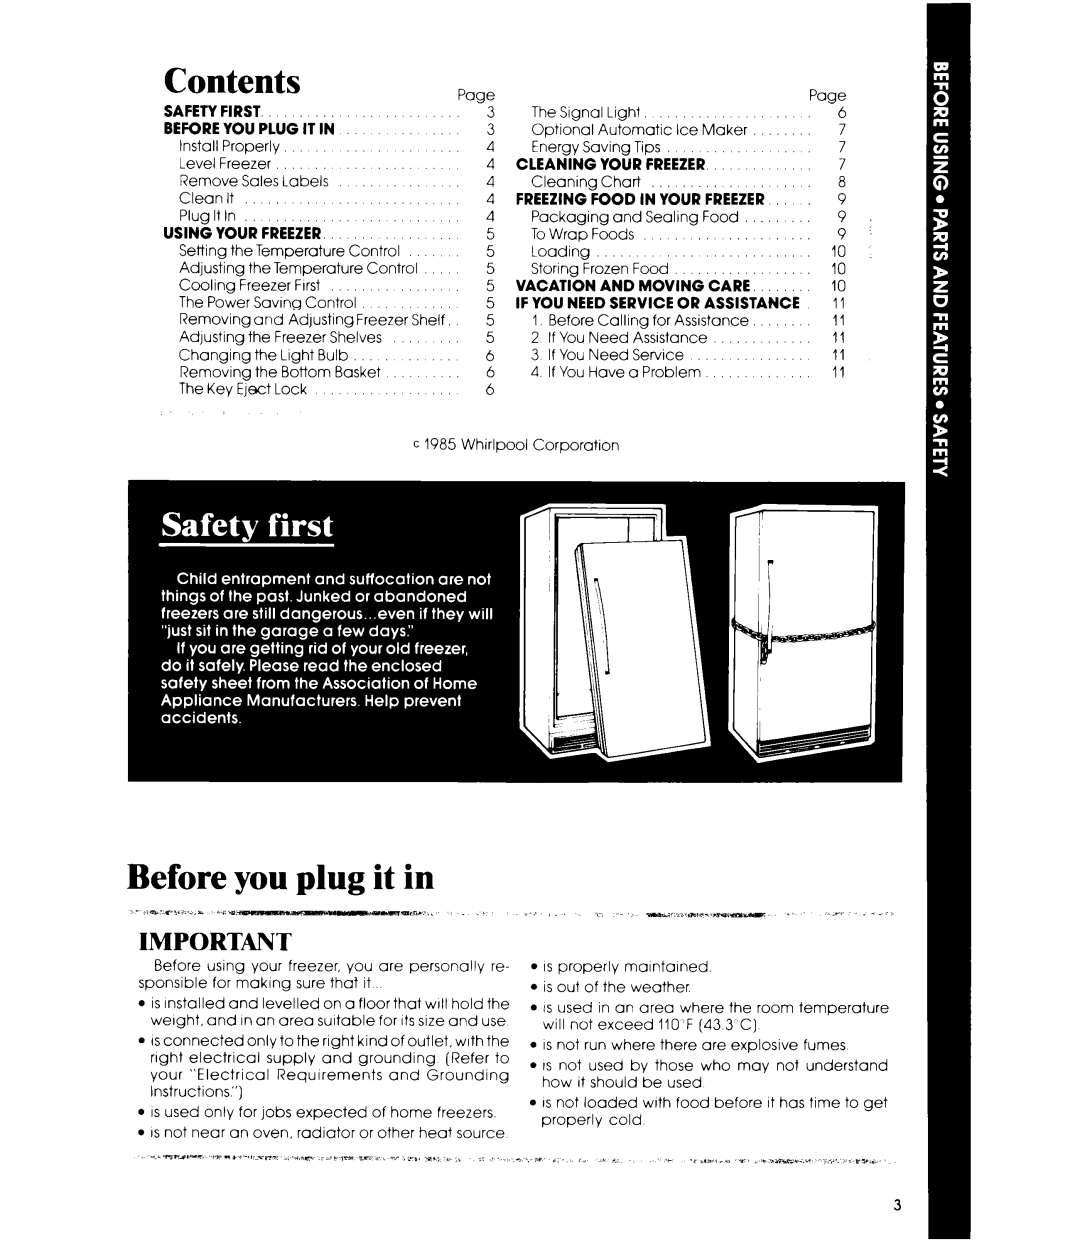 Whirlpool EVISHEXP manual Before you plug it in, Contents 